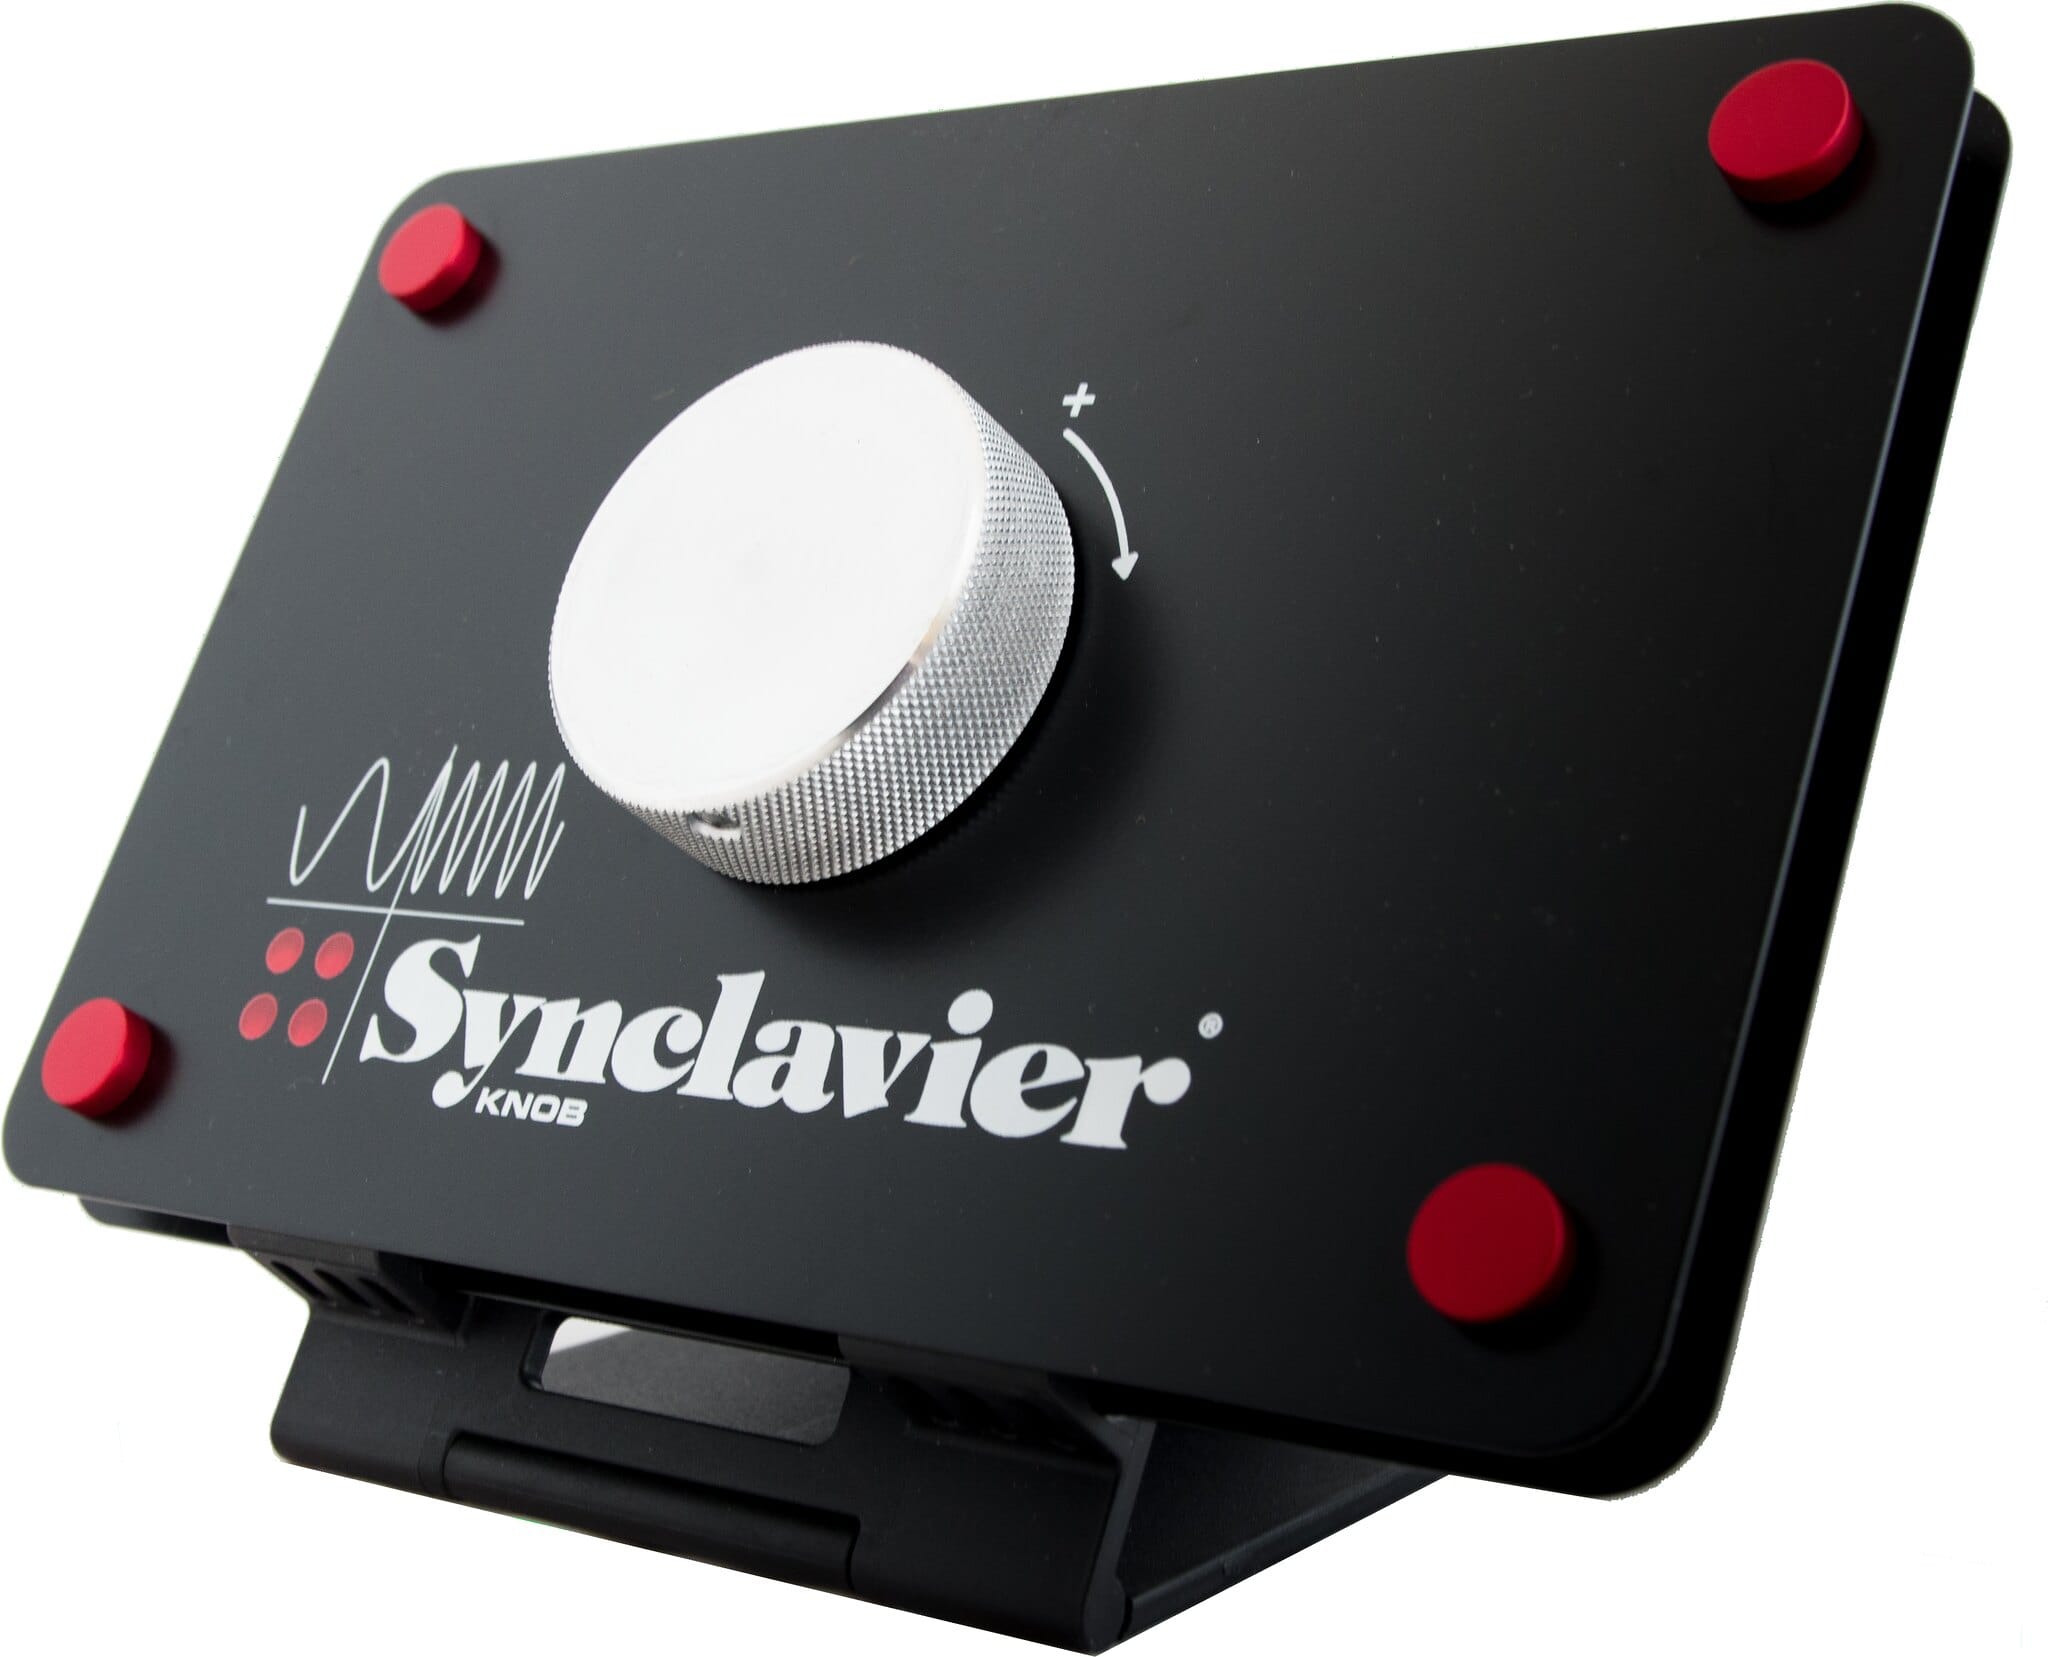 The Synclavier Knob fits many iPad mini stands.